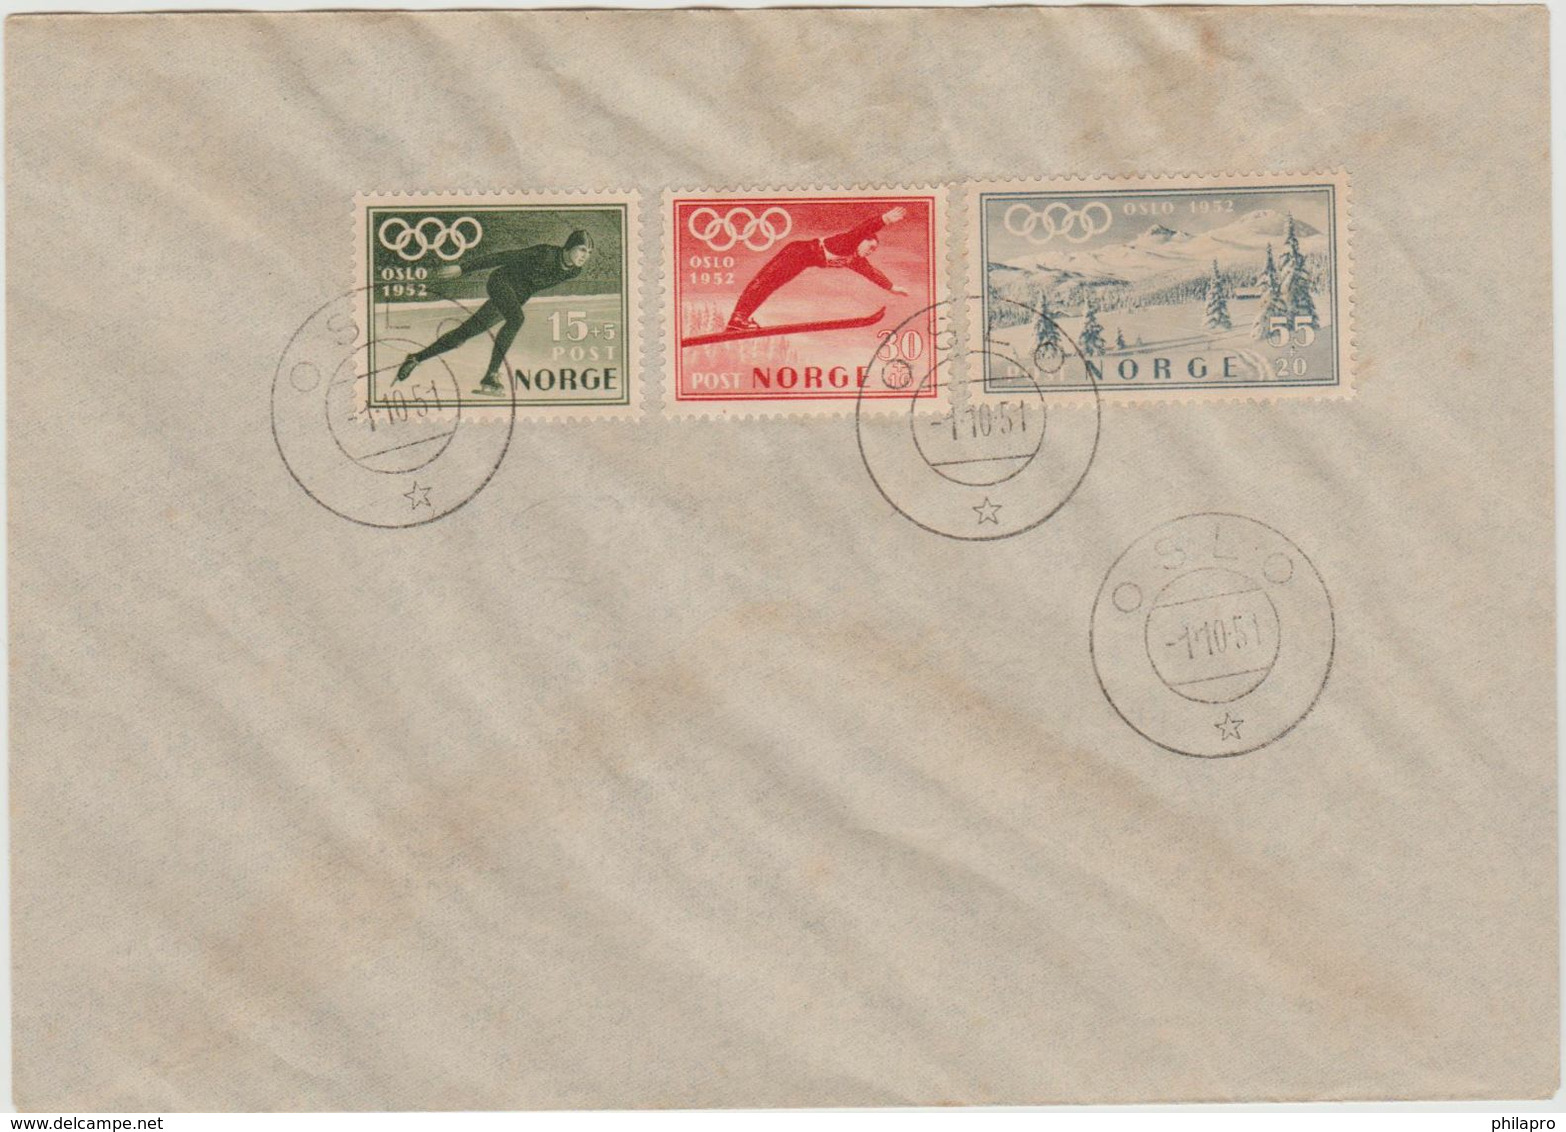 NORVEGE / NORWAY    FDC  OLYMPIC 1952  Réf  Q 556 - Hiver 1952: Oslo